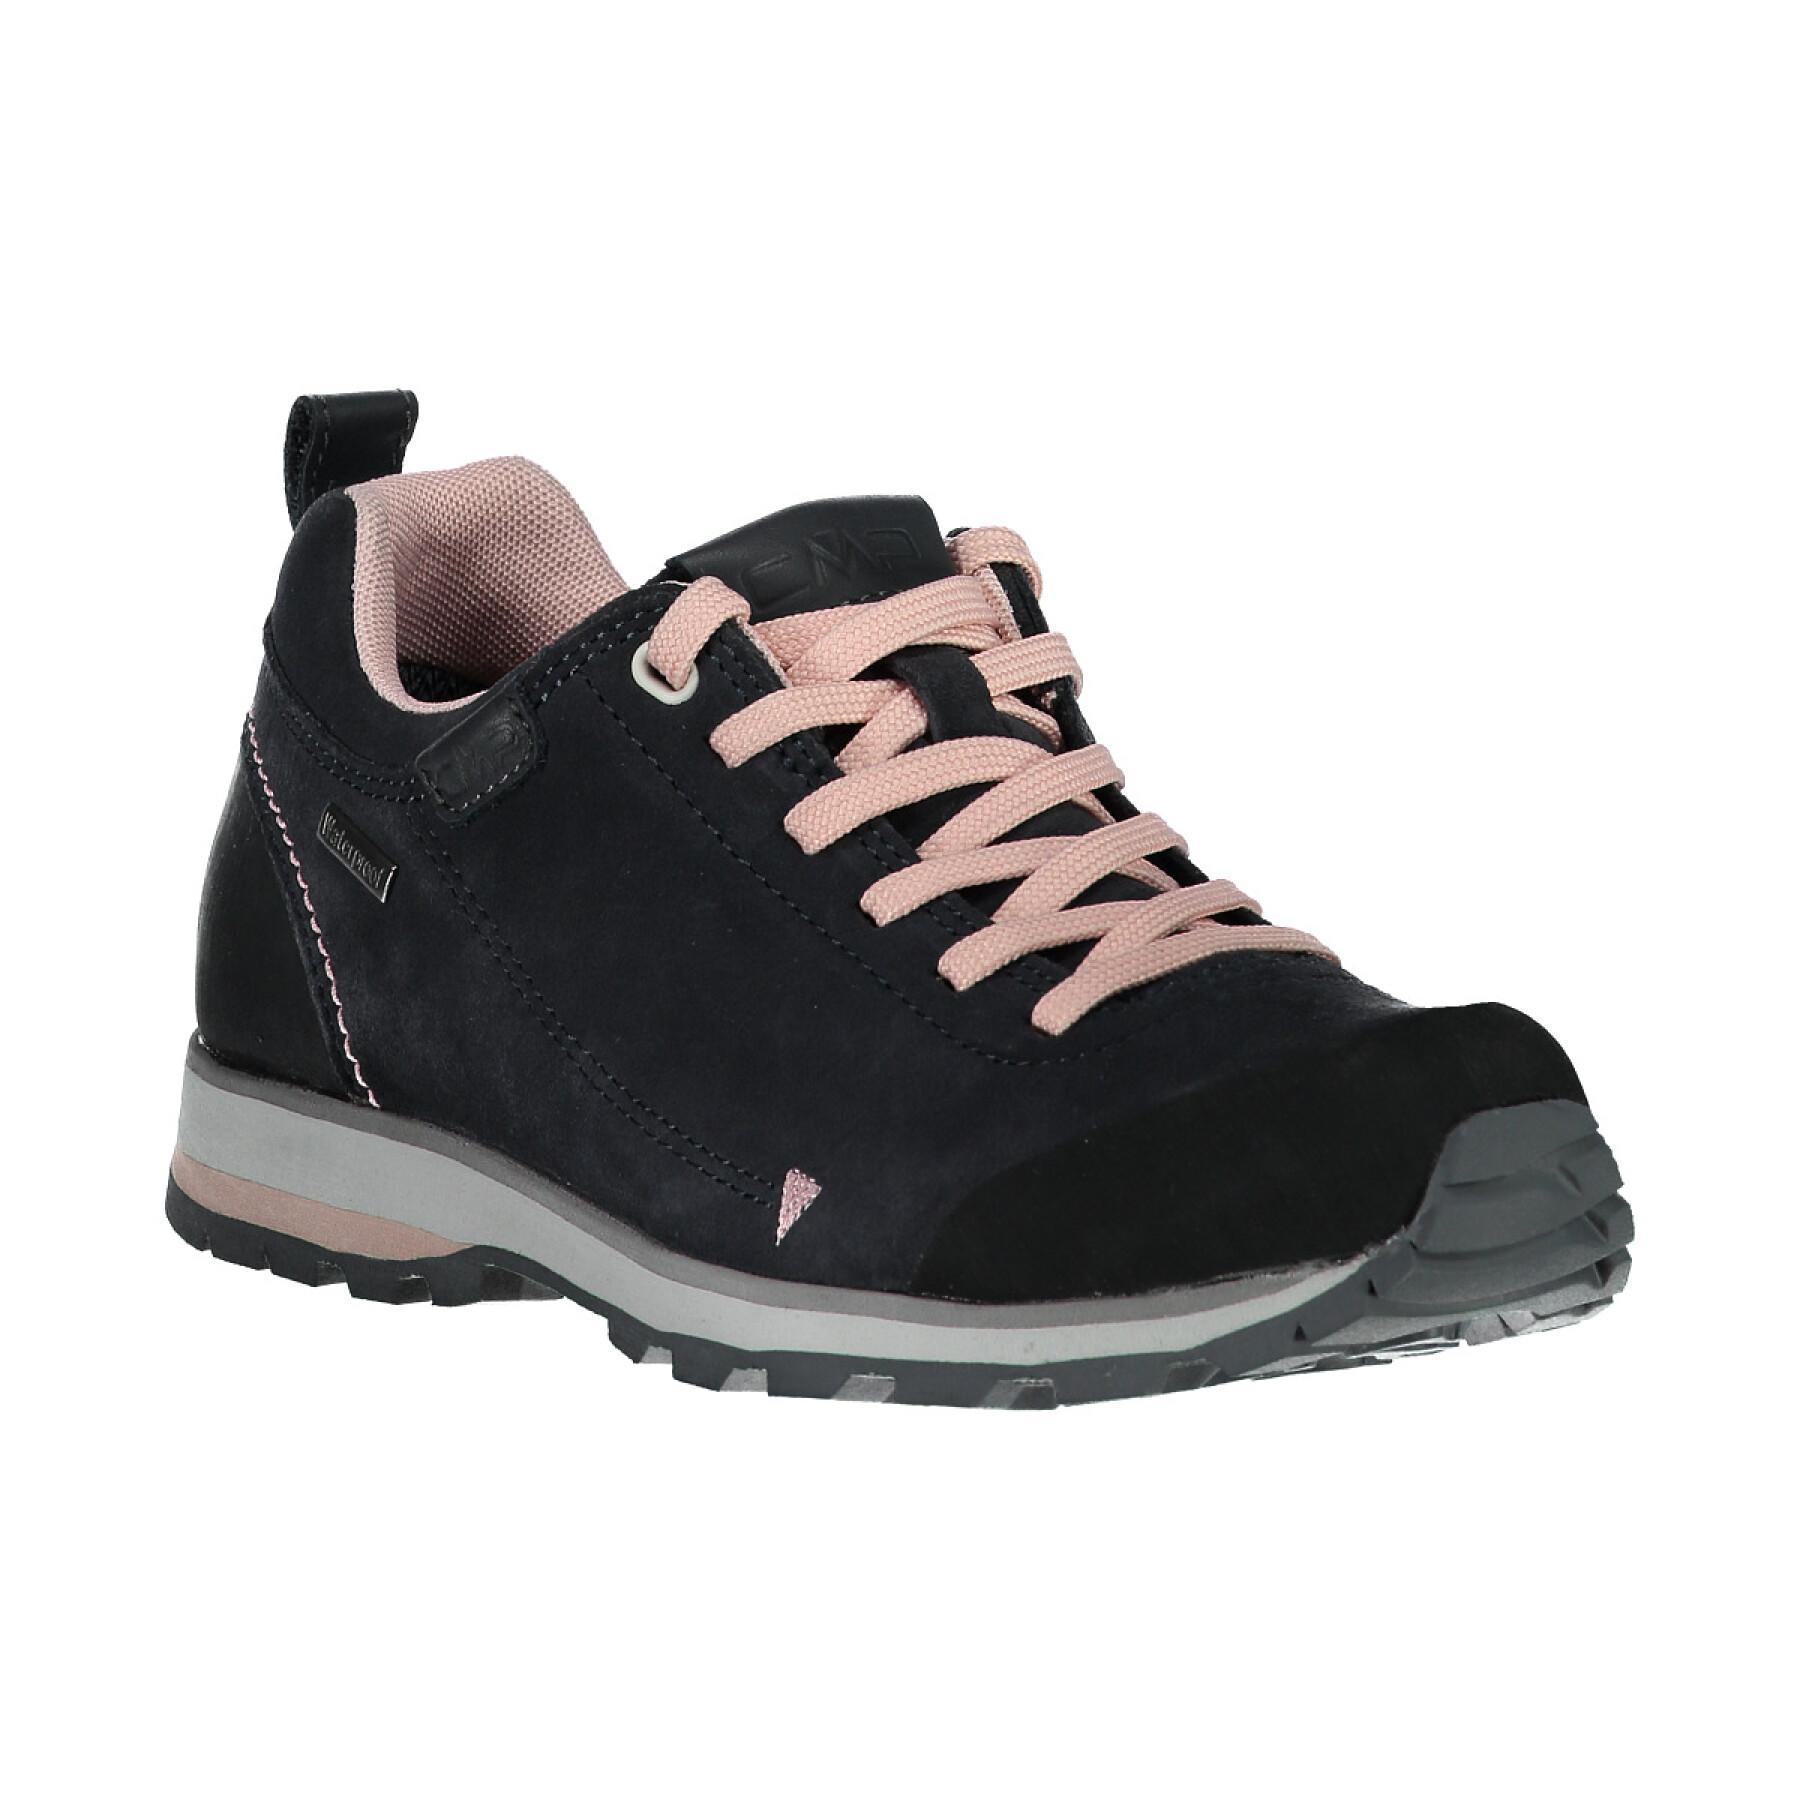 Low hiking shoes for women CMP Elettra WP